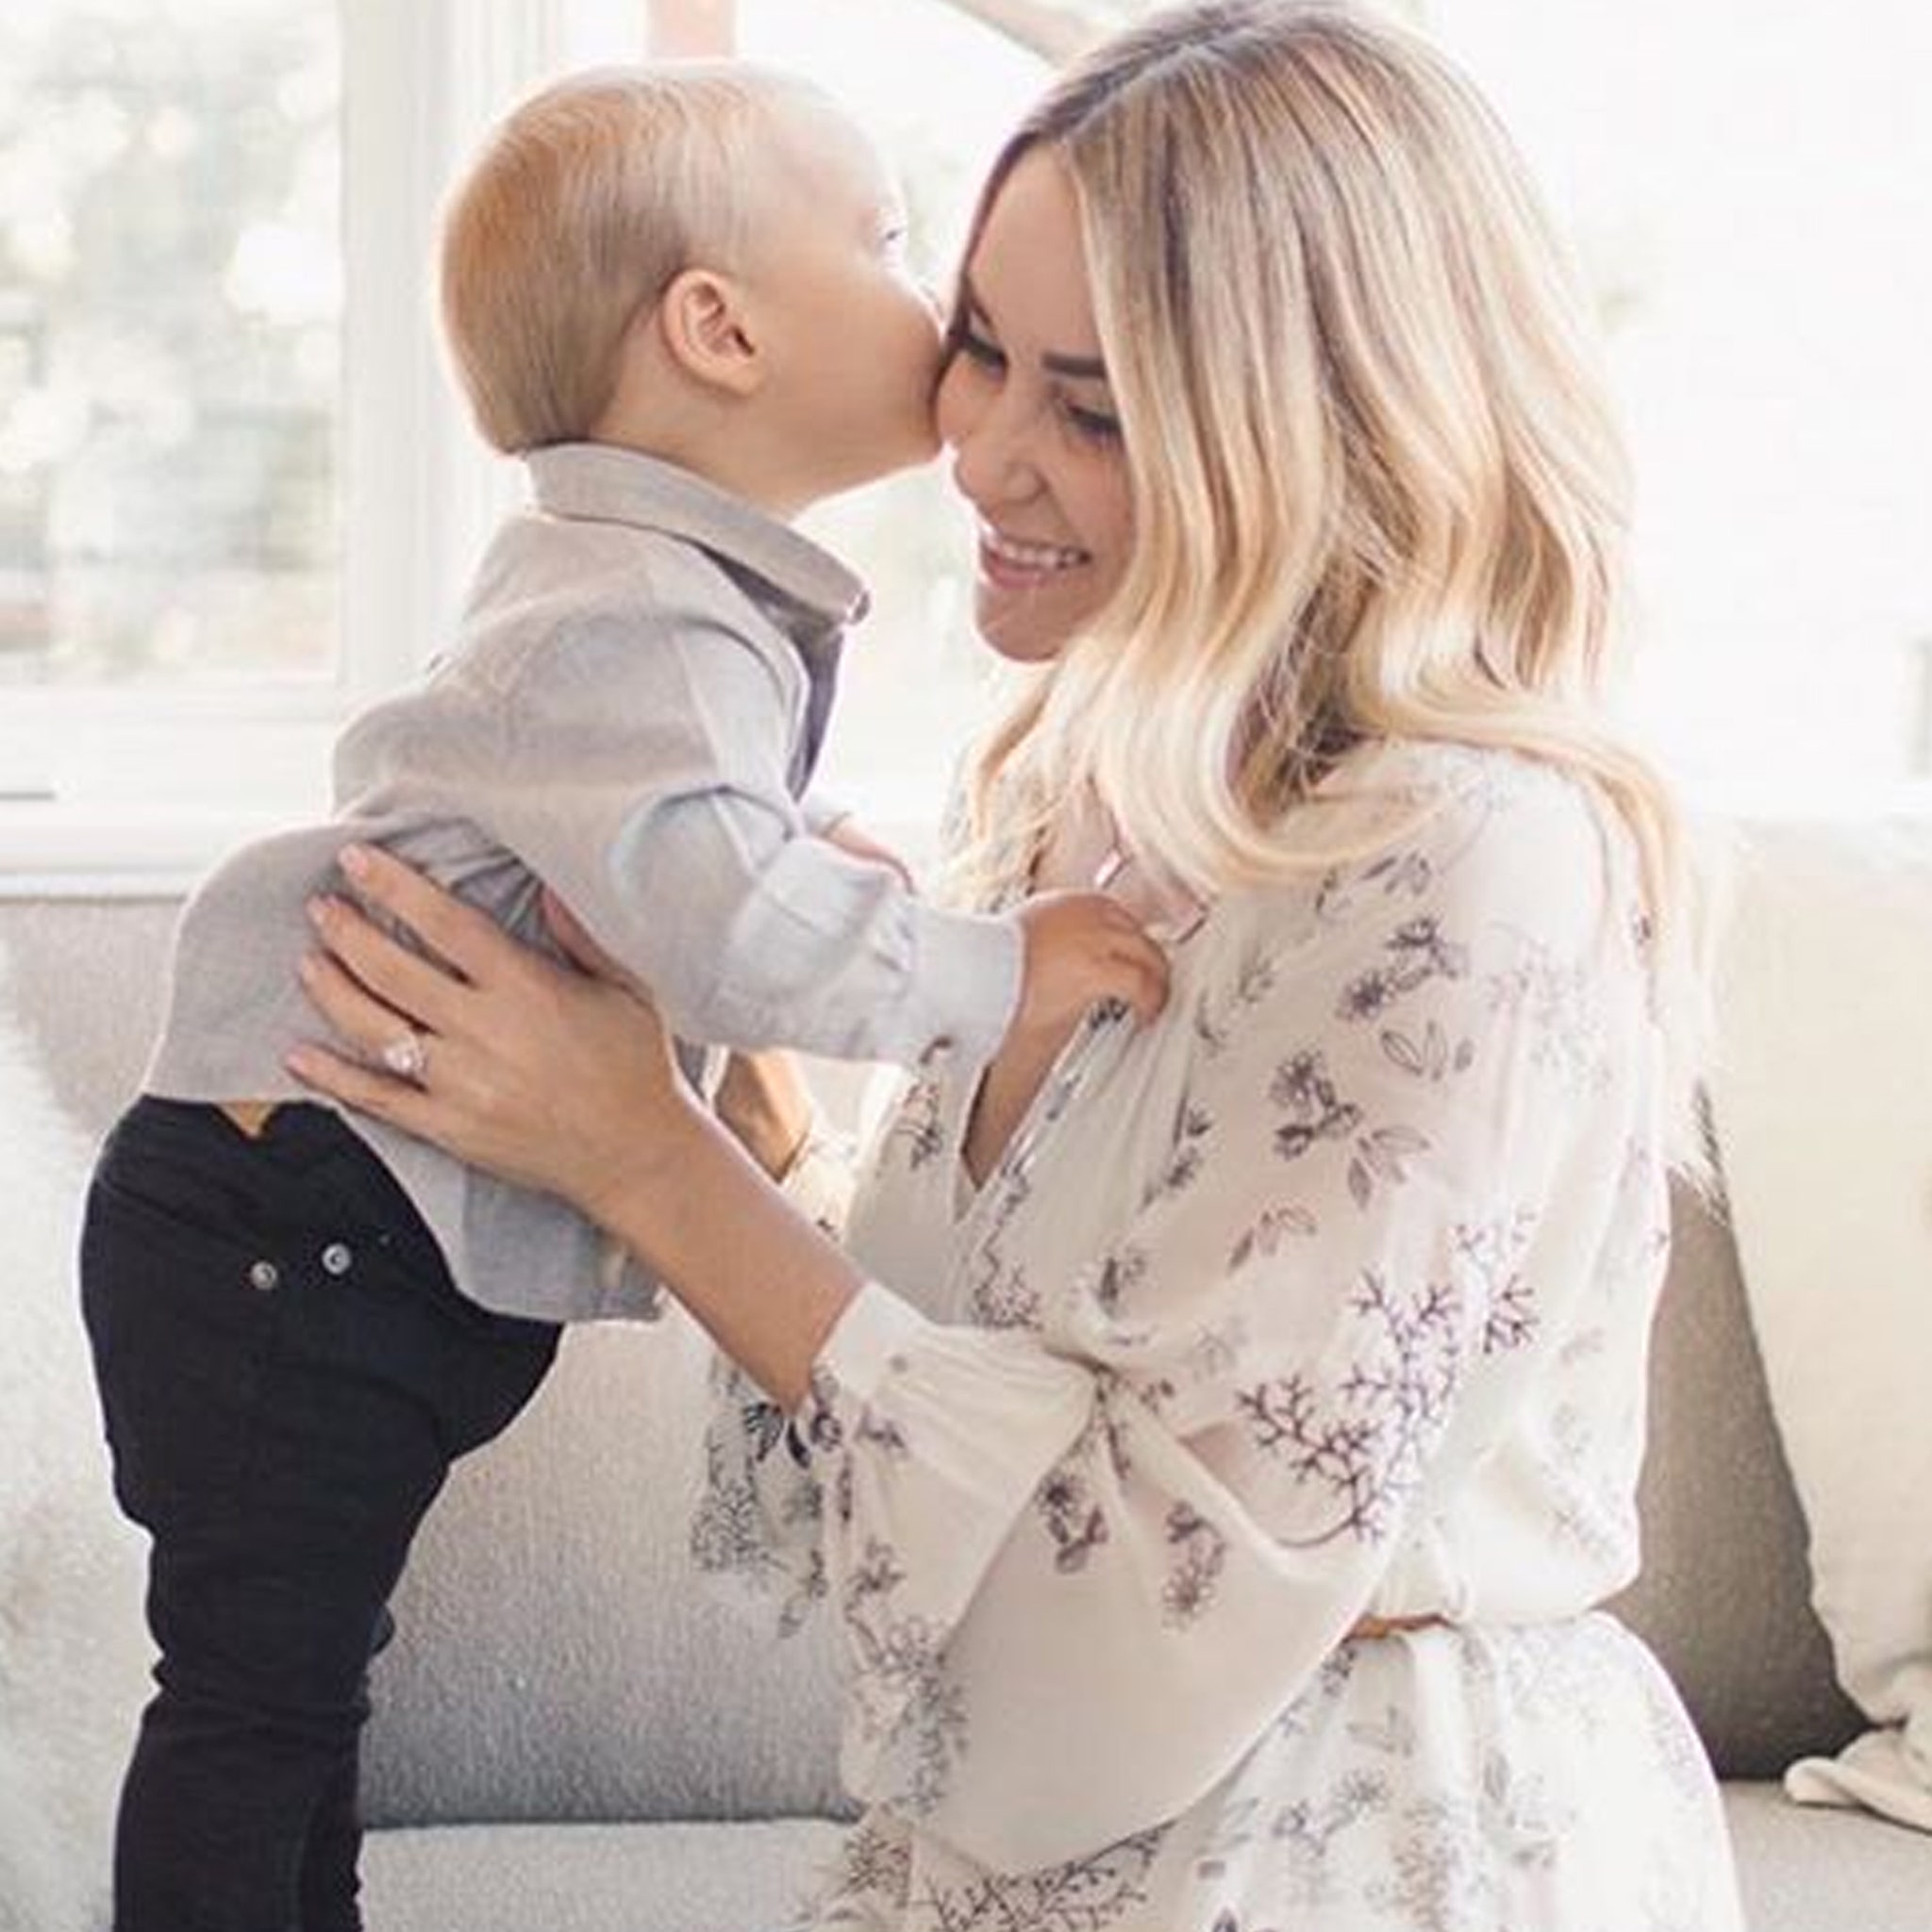 Lauren Conrad welcomes baby boy with husband William Tell and